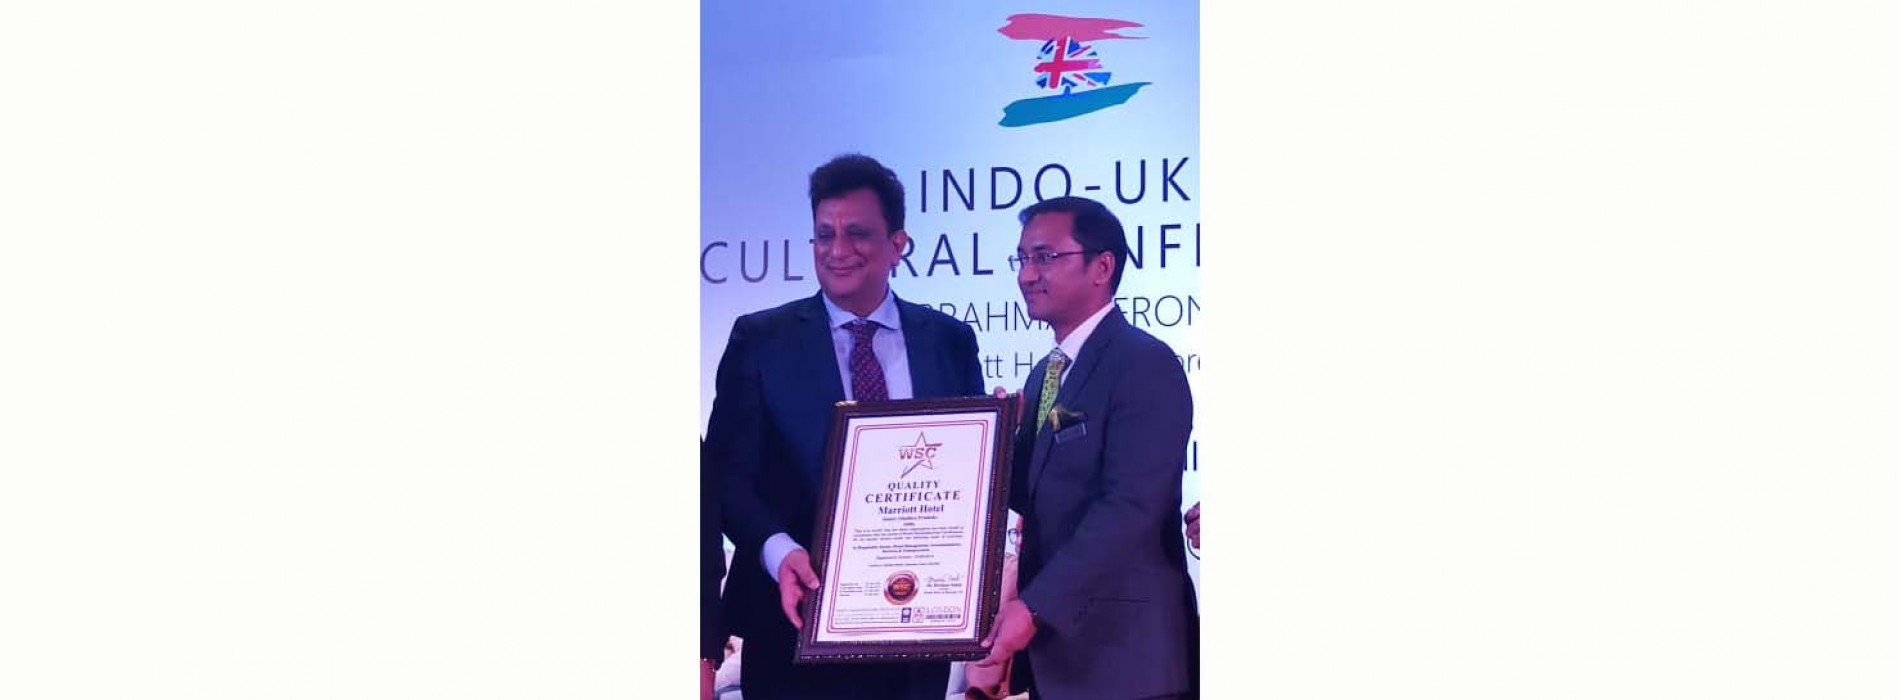 Indore Marriott hotel awarded with ‘Quality Certificate’ by World Book of Records